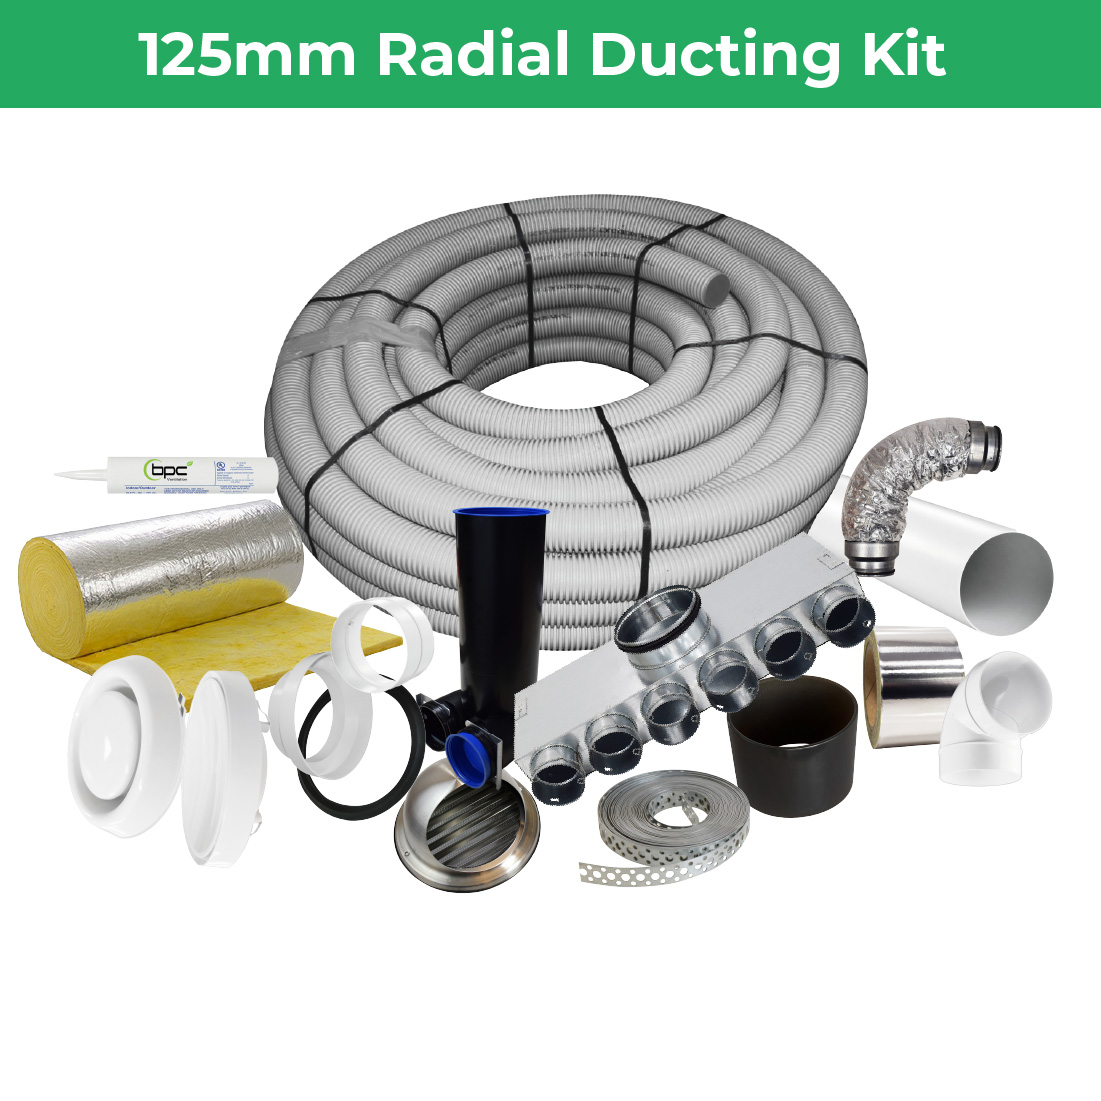 Quiet-Vent 125mm Radial Ducting Kits